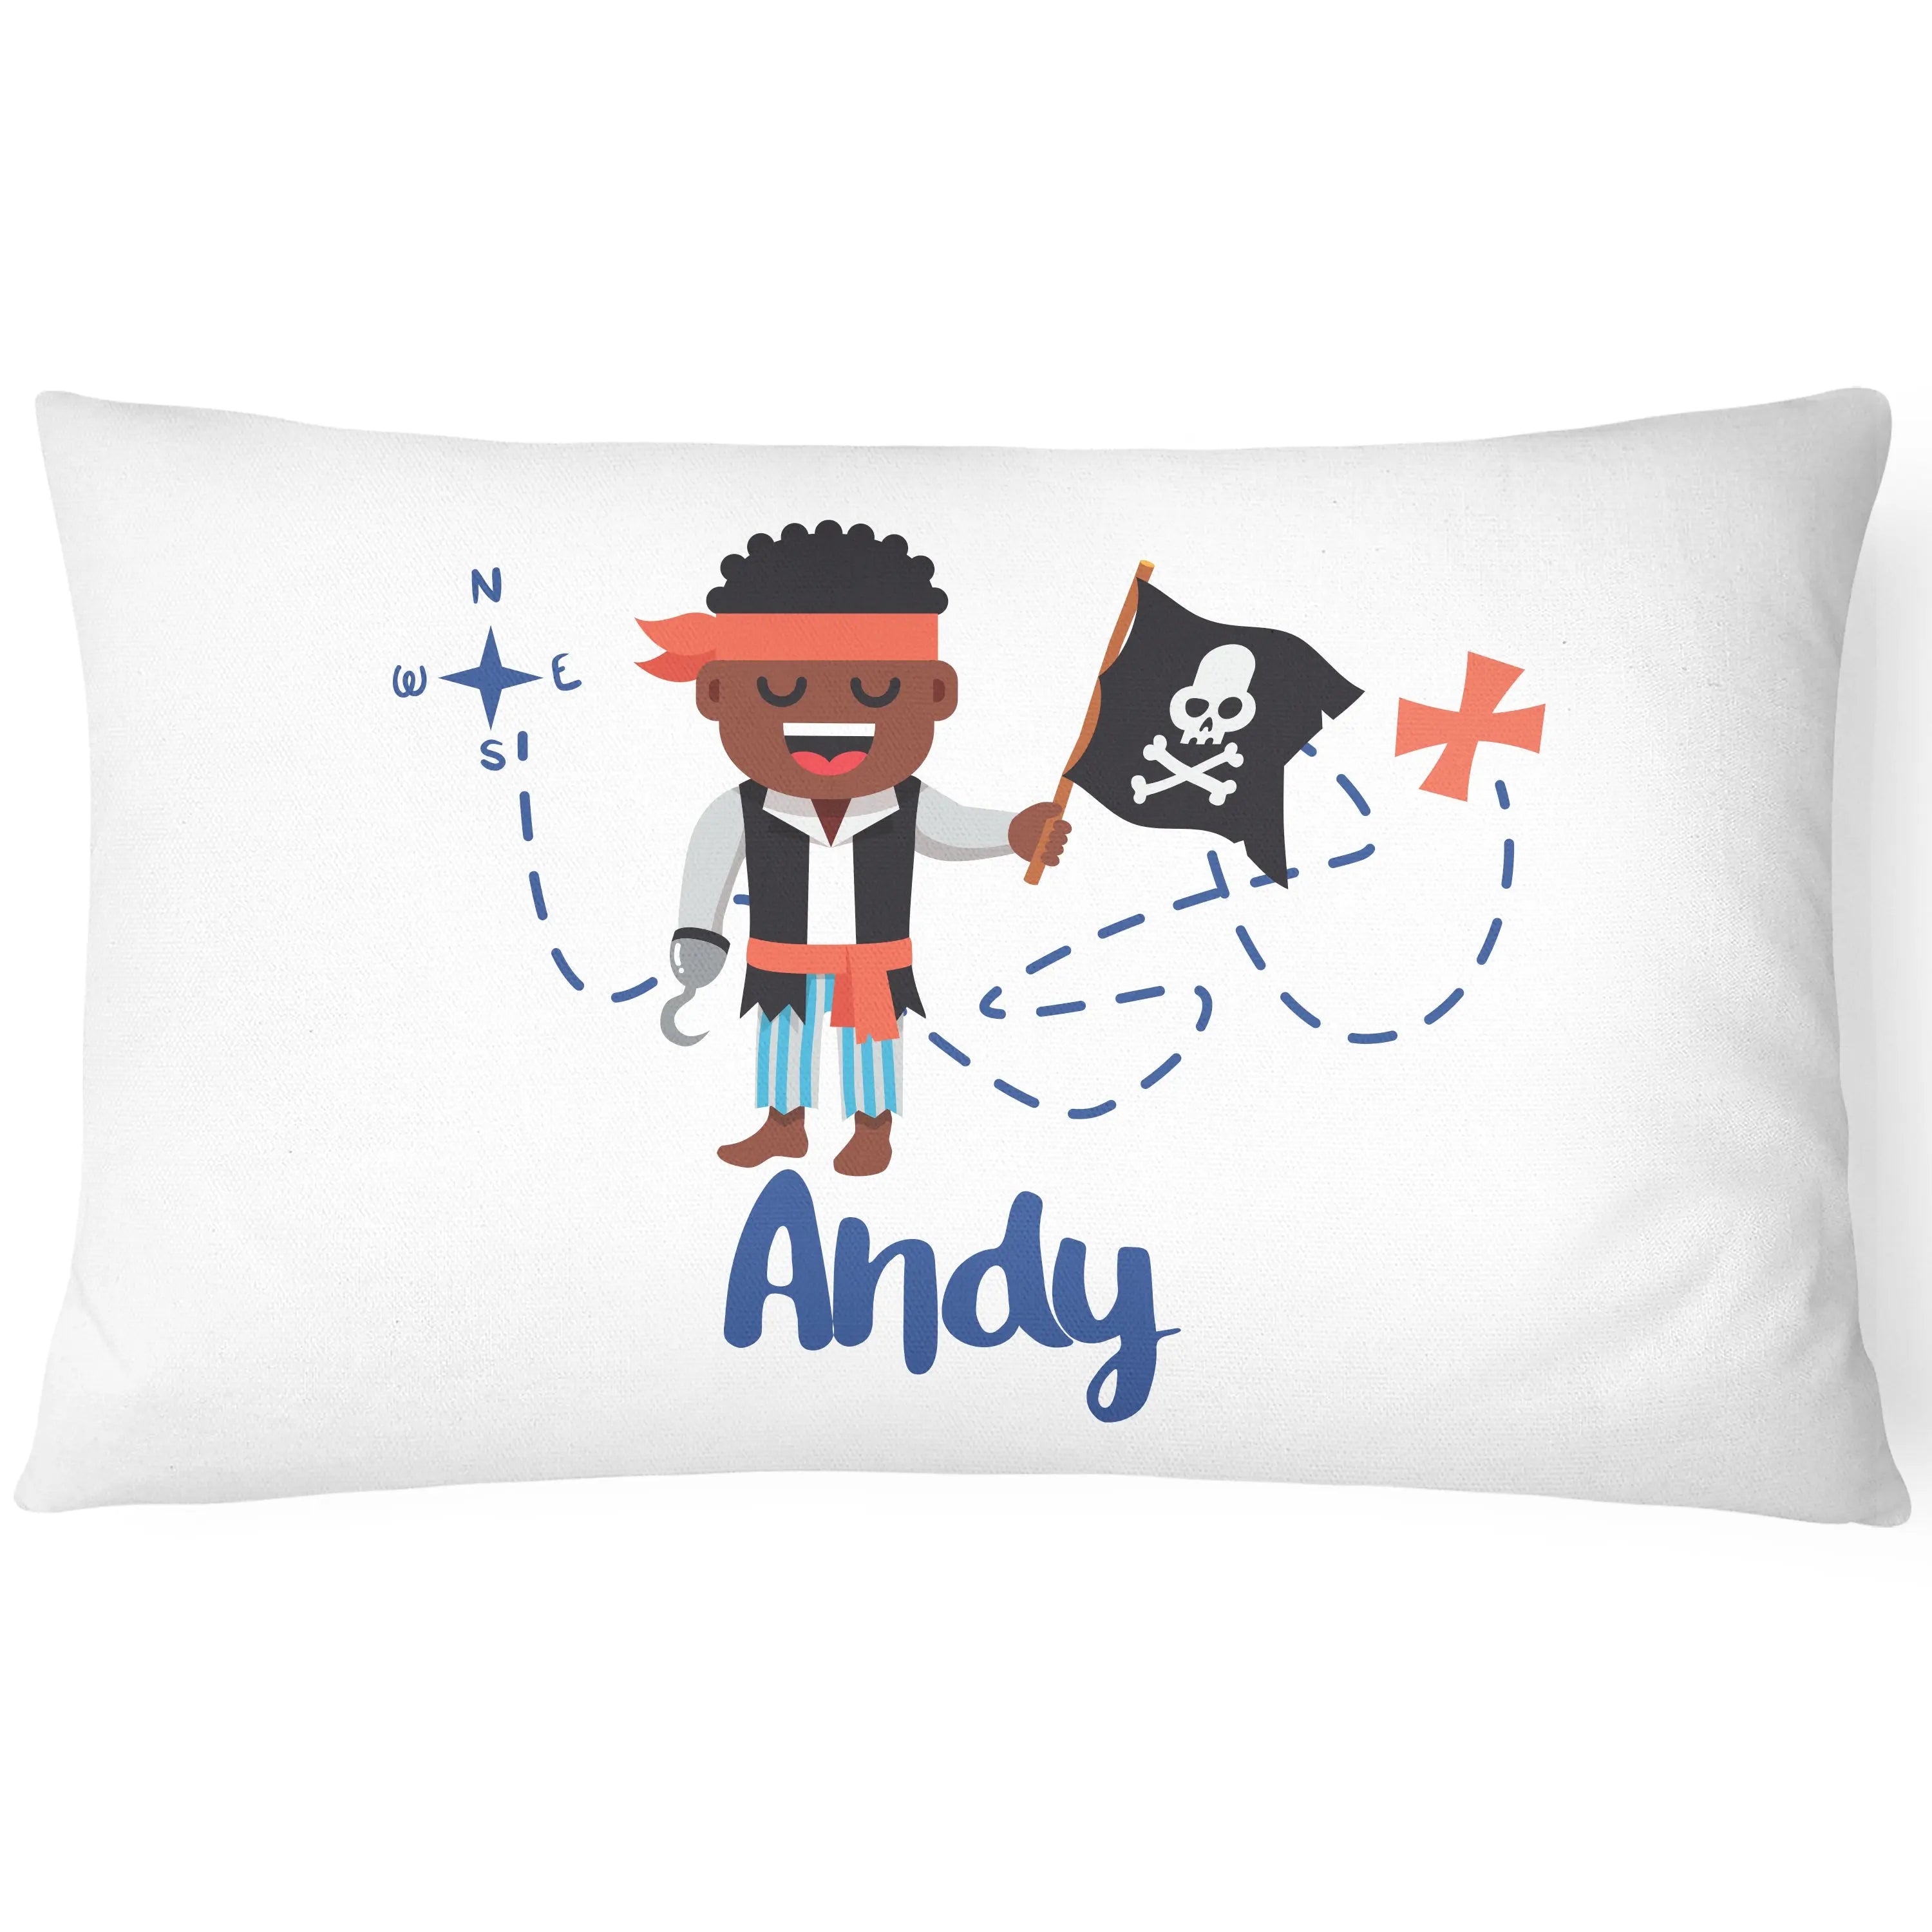 Pirate Pillowcase for Kids - Personalise With Any Name - Perfect Children's Gift - Blue